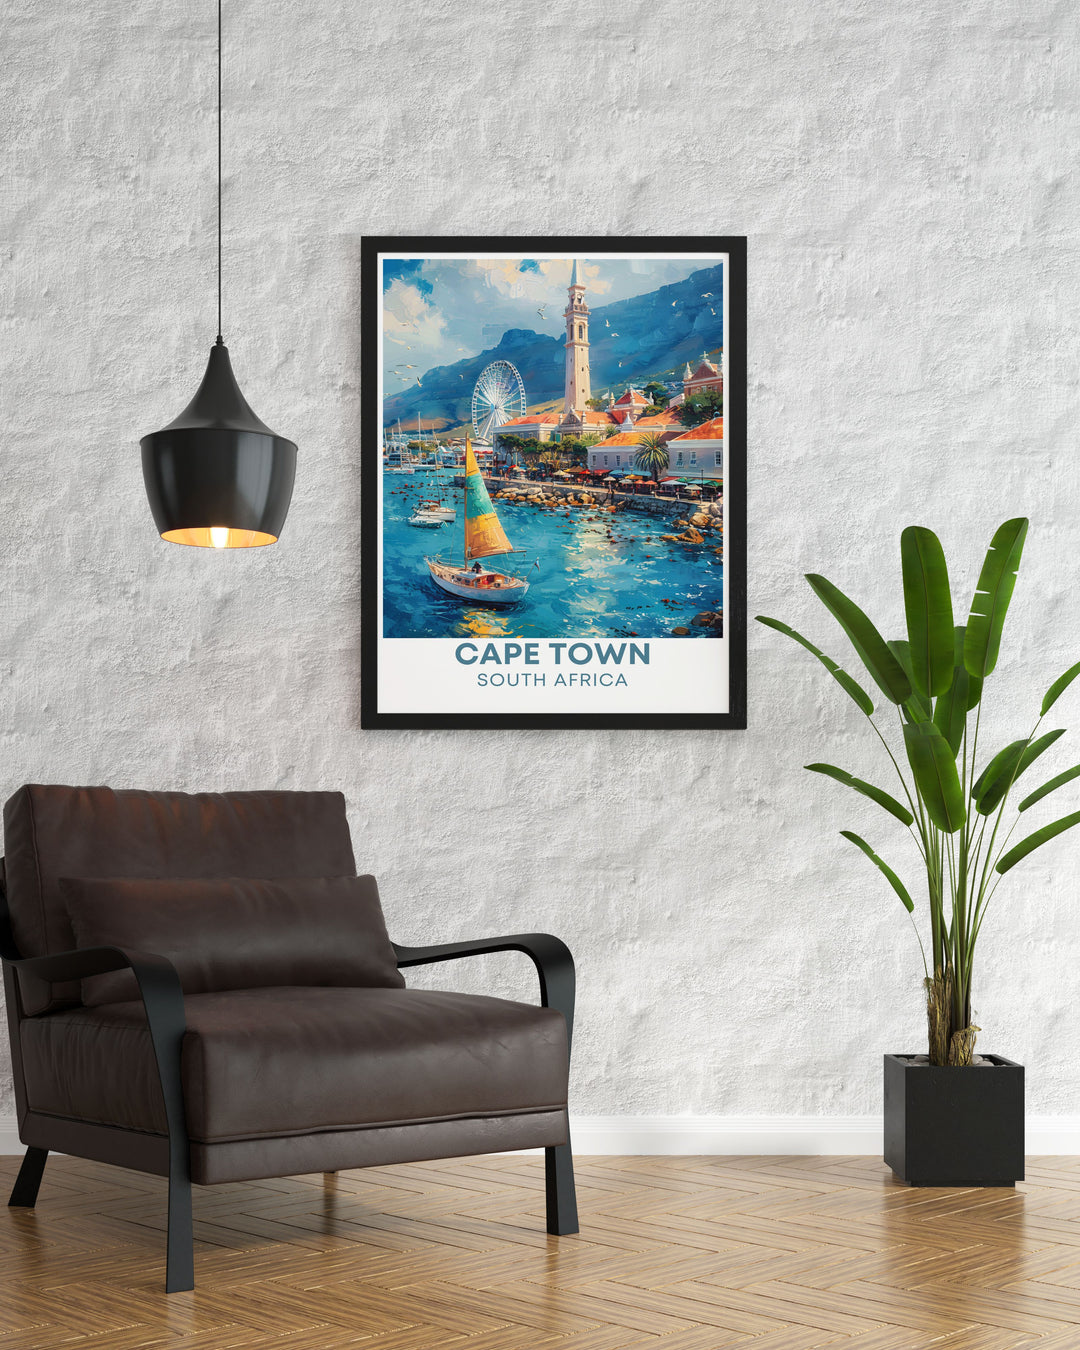 The captivating blend of historic architecture and natural landscapes at the Victoria & Alfred Waterfront and Table Mountain is beautifully illustrated in this poster, making it a stunning addition to any wall art collection celebrating South Africa.